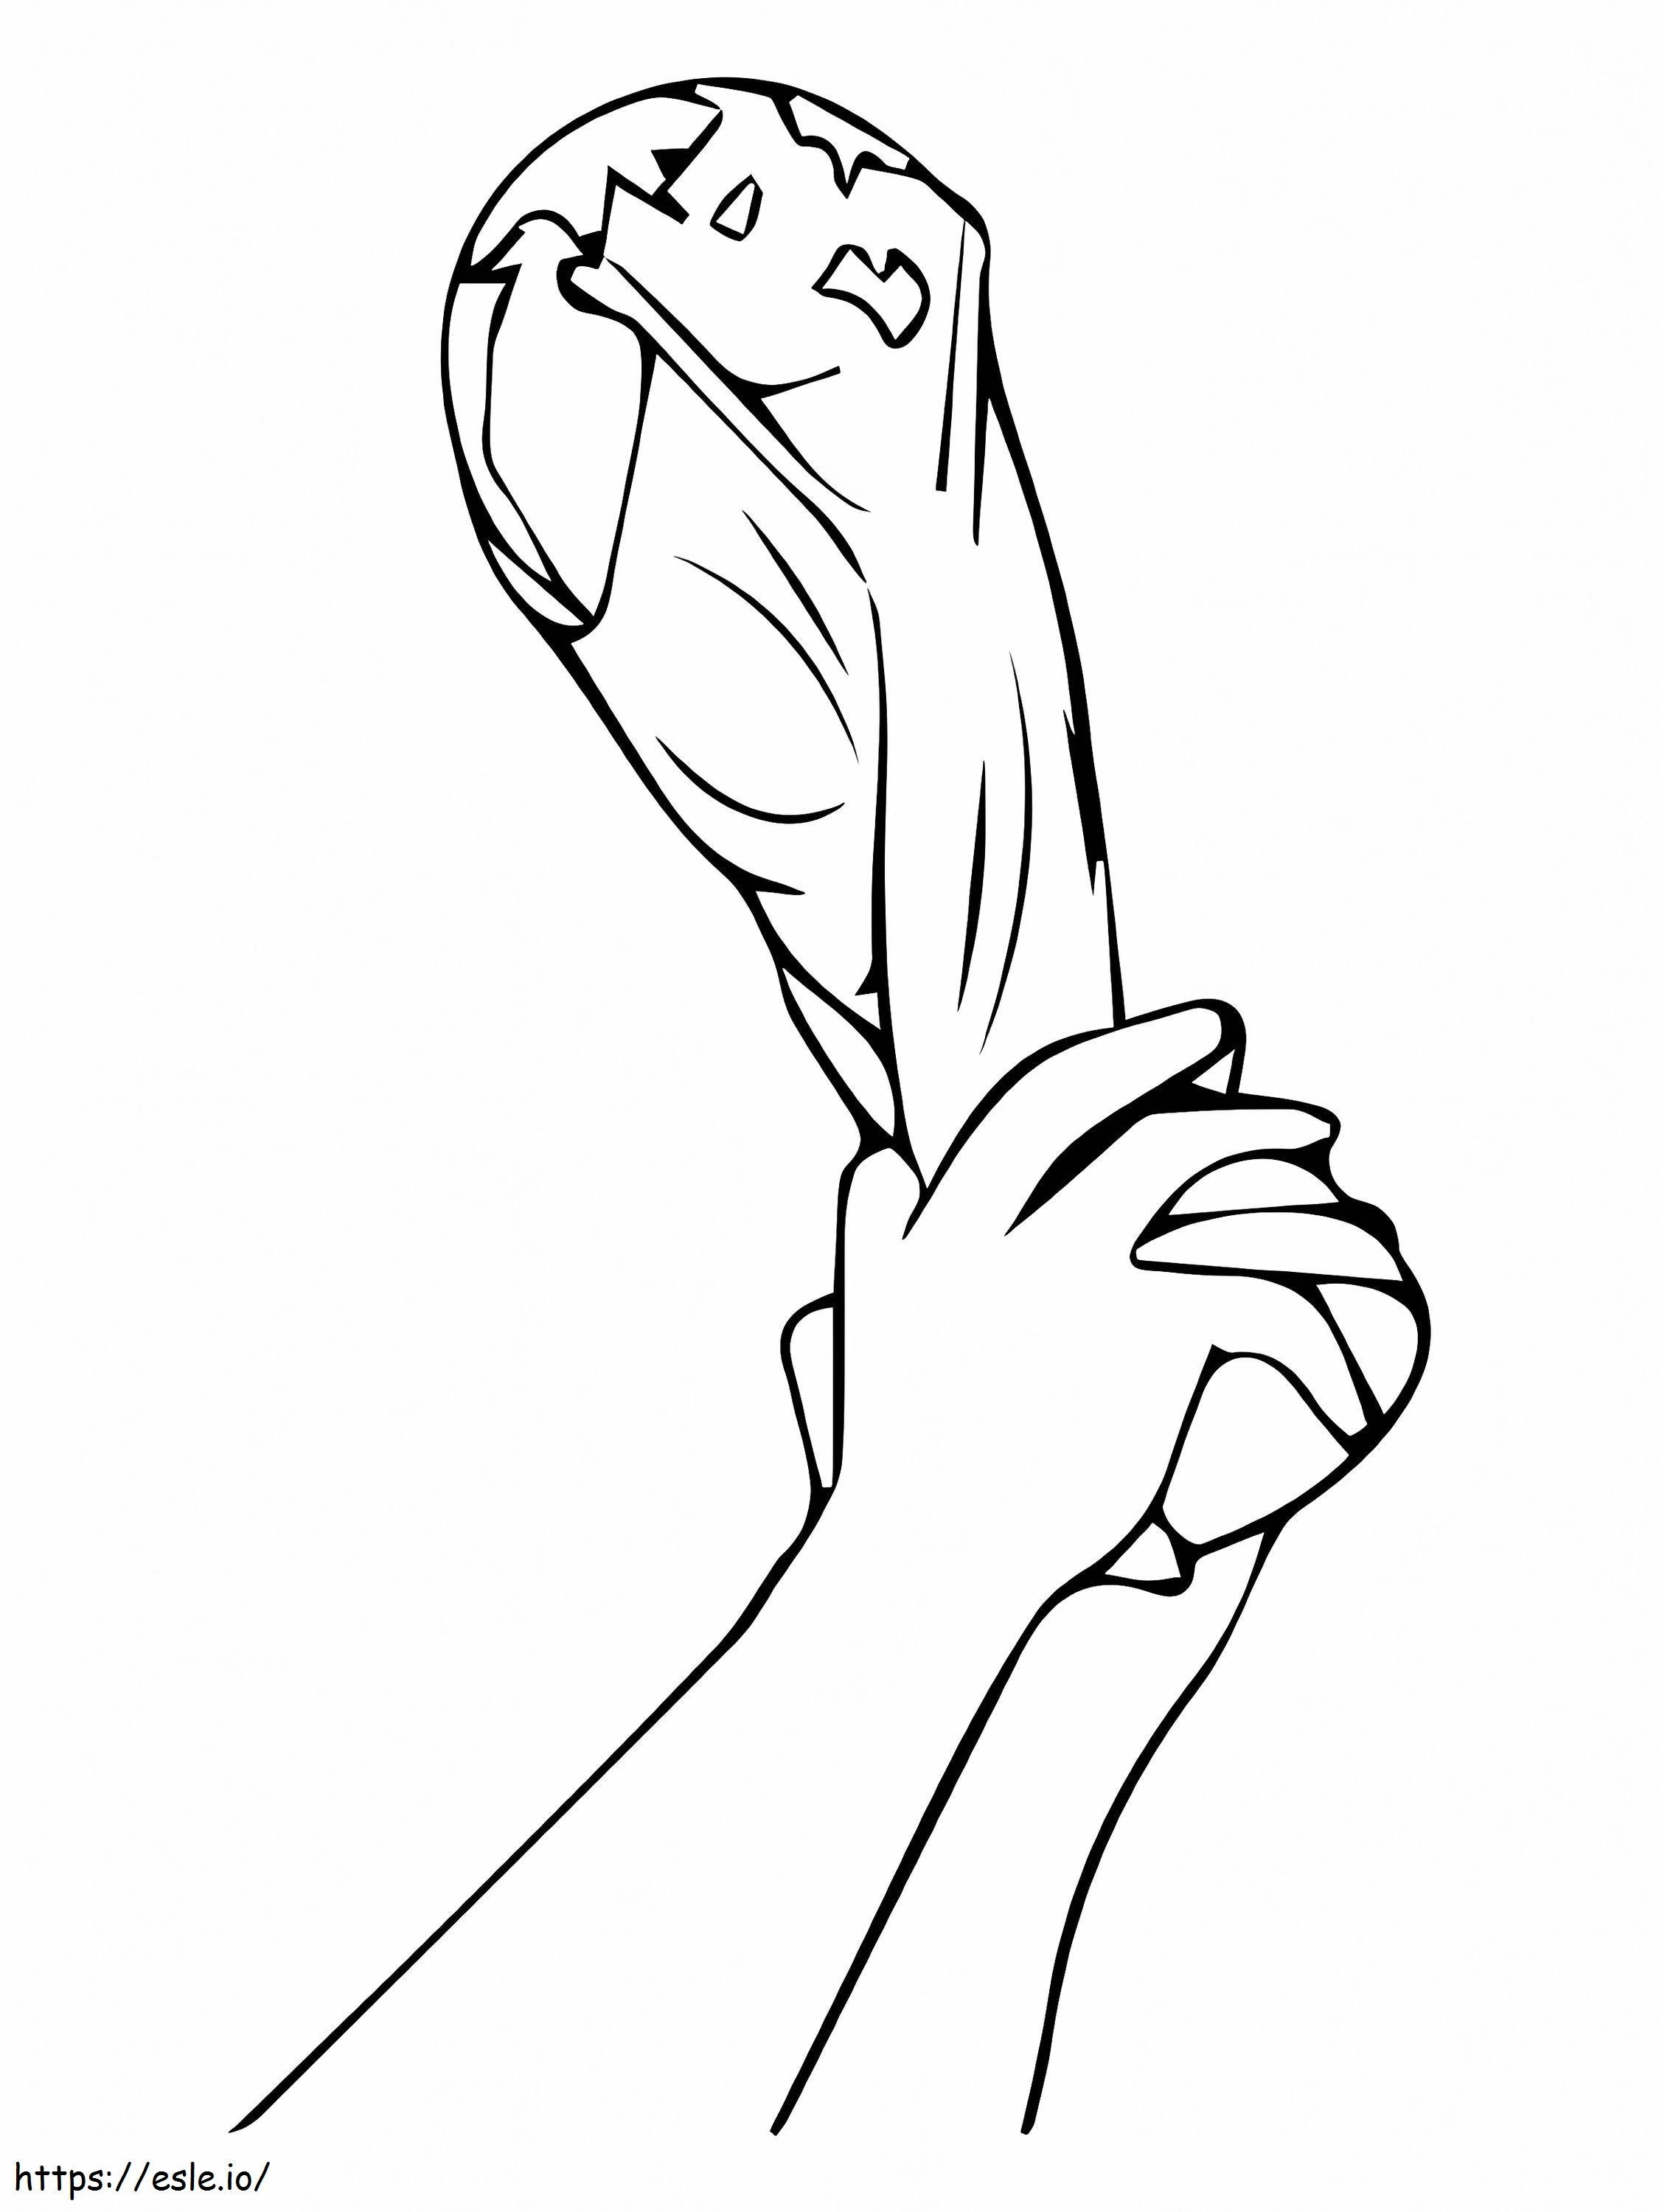 Fifa World Cup Winning Trophy 2 coloring page